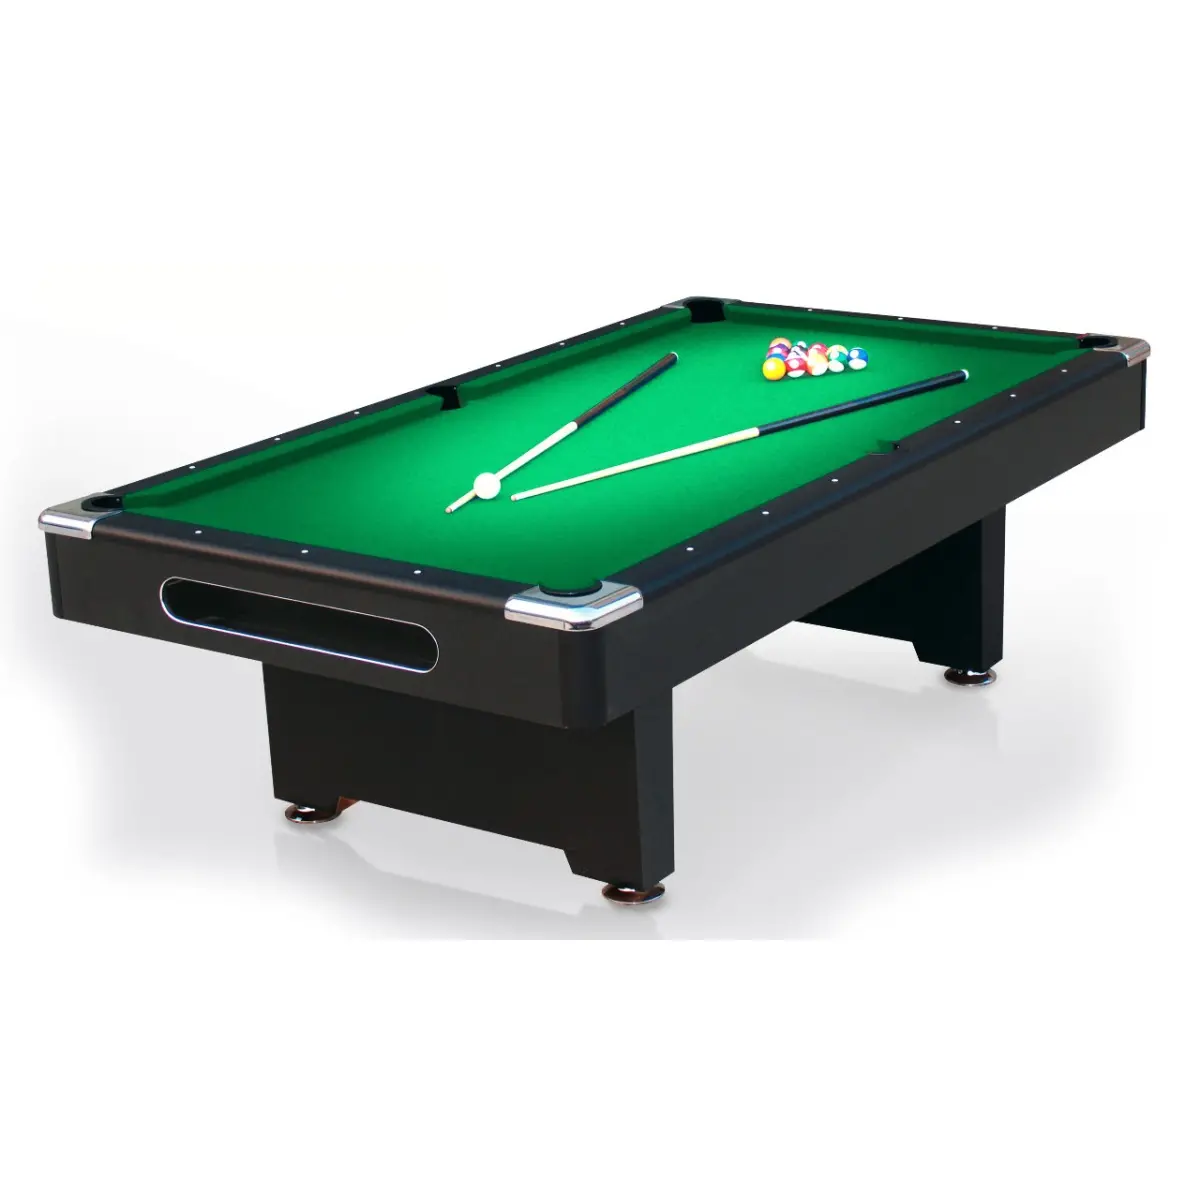 Powerglide Plastic Triangle Snooker And Pool All Sizes Available rrp£9 